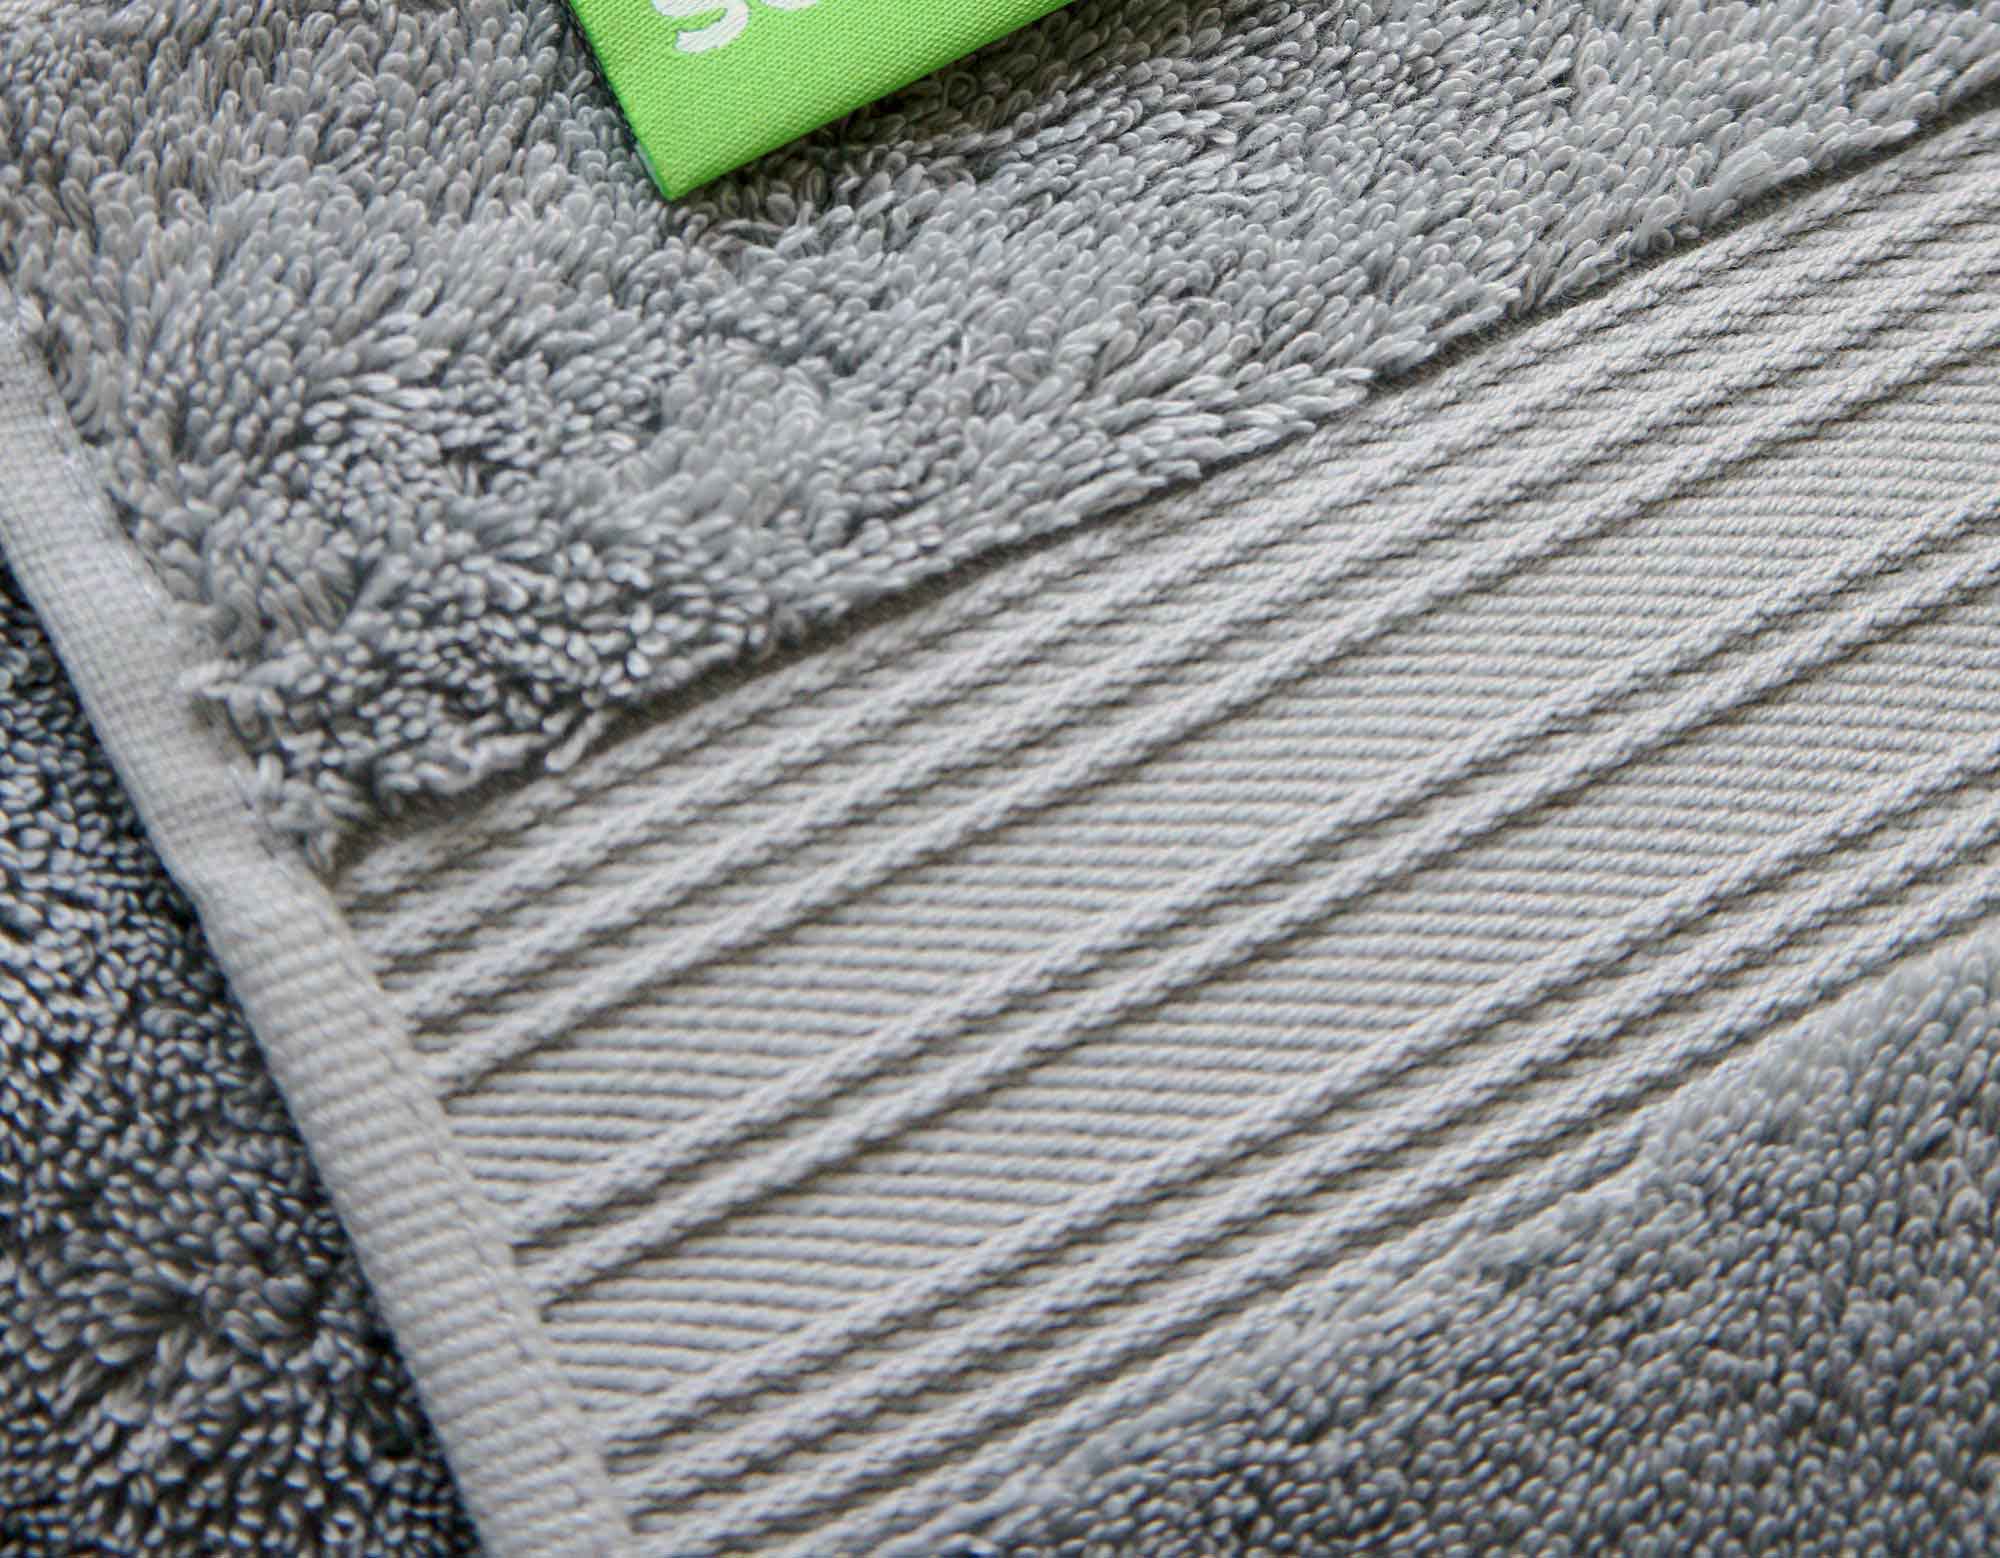 Silver grey cotton bath towels  close-up showing details of the stitching and scooms logo